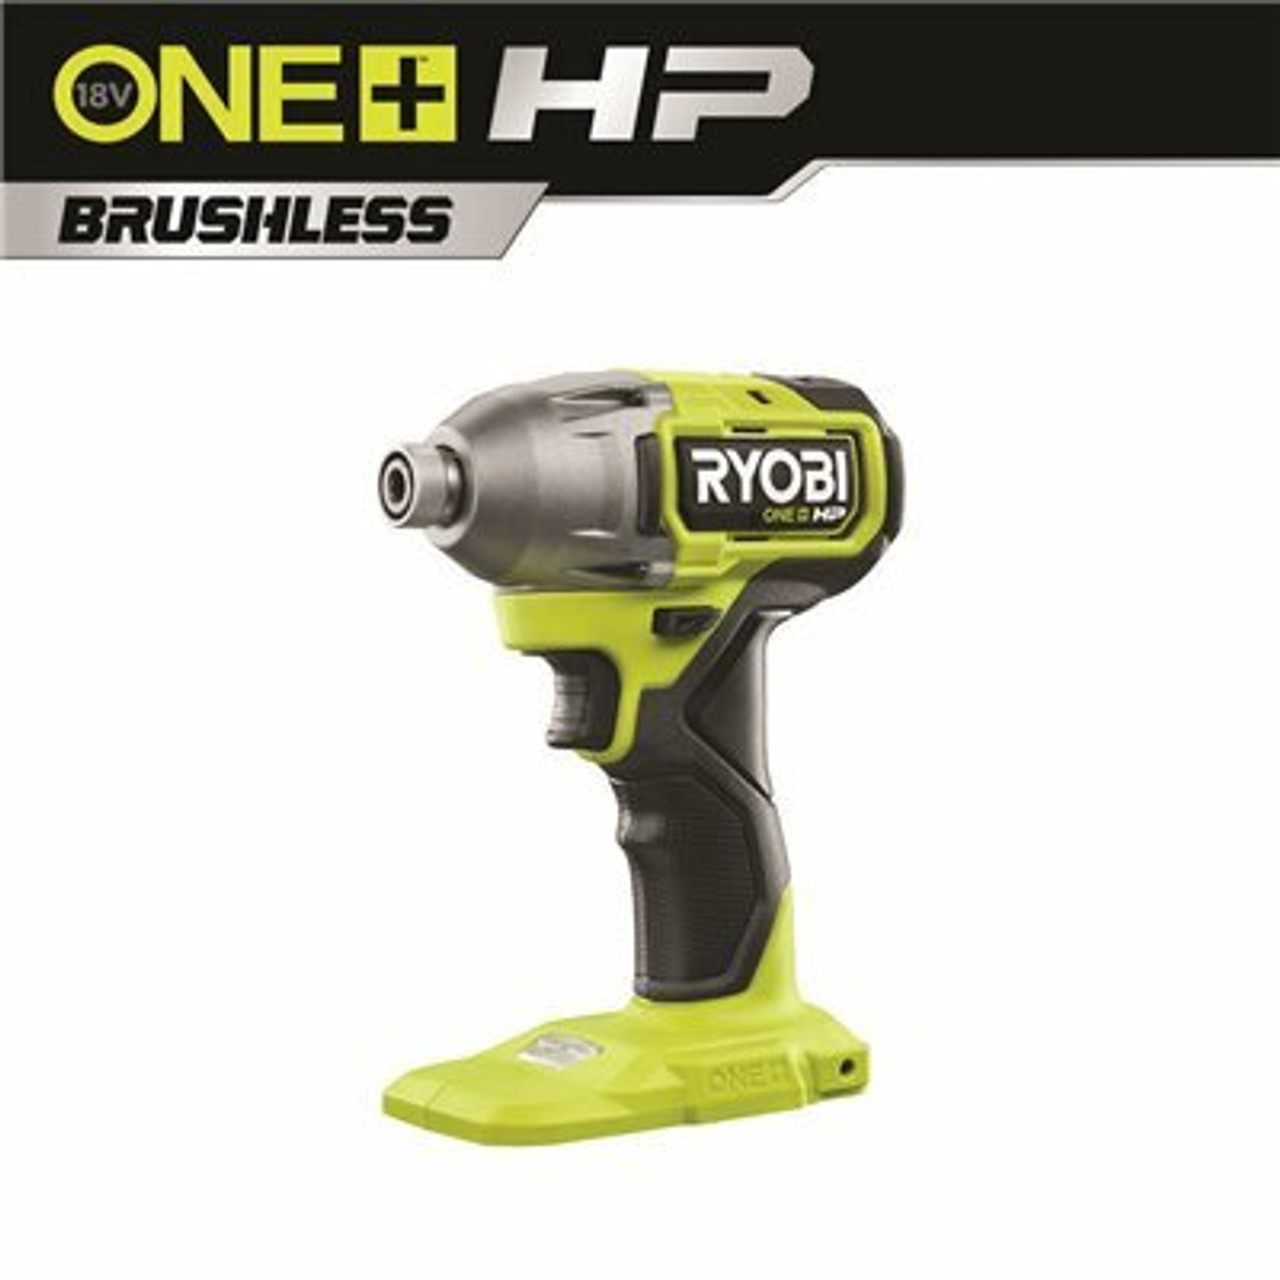 Ryobi One+ Hp 18V Brushless Cordless 1/4 In. Impact Driver (Tool Only)